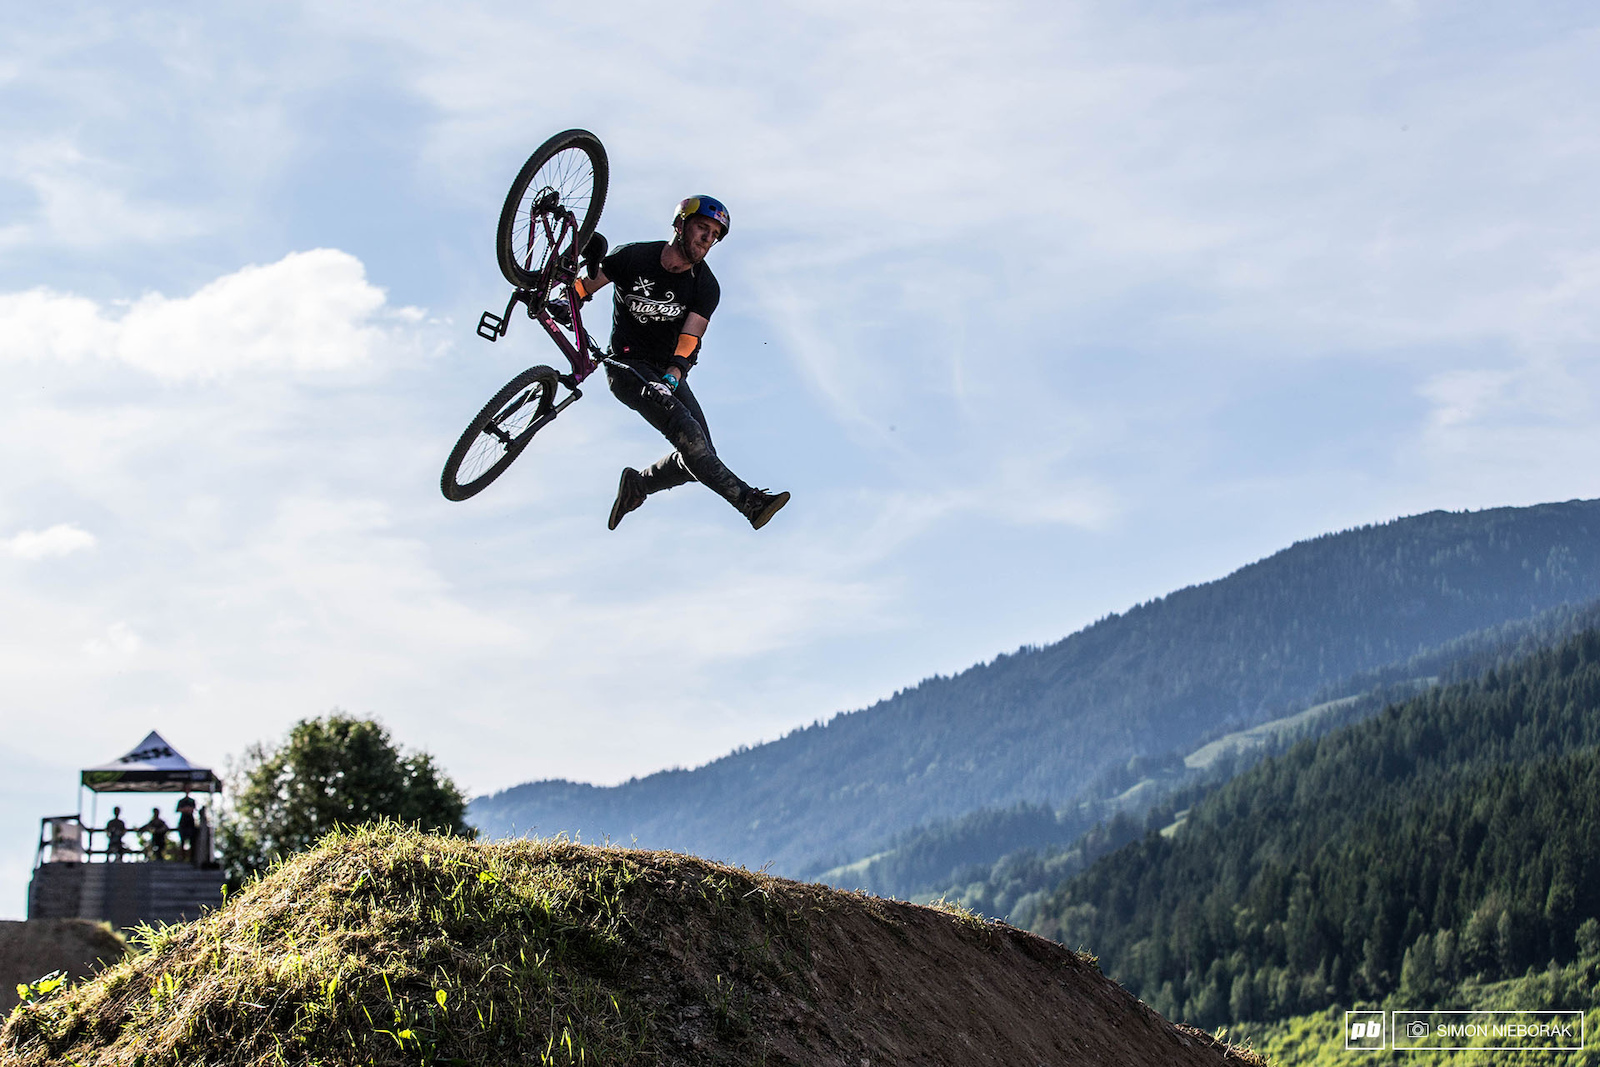 Double downside tailwhip by Pavel.